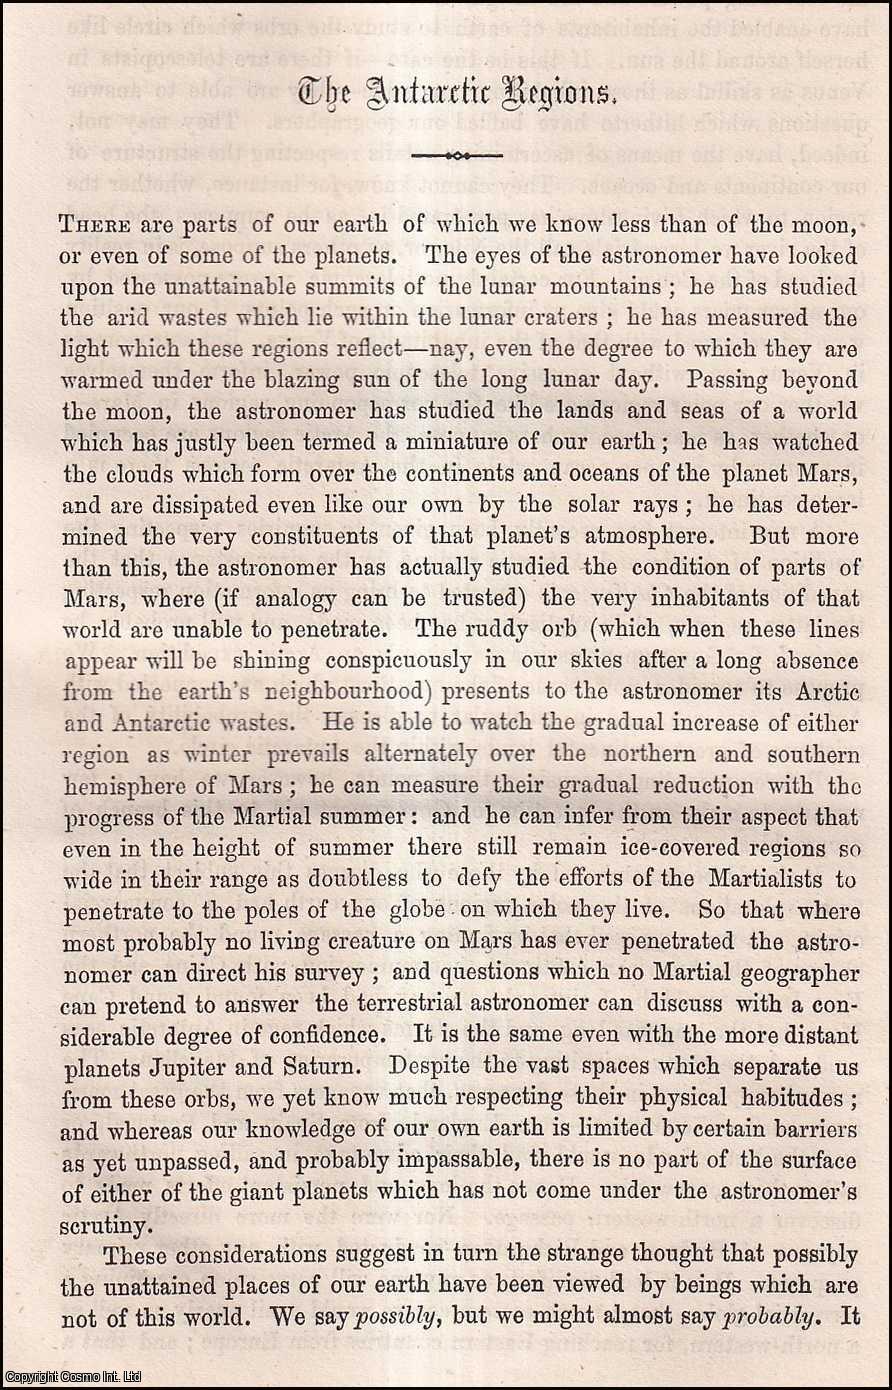 R.A. Proctor - The Antarctic Regions. An uncommon original article from the Cornhill Magazine, 1873.